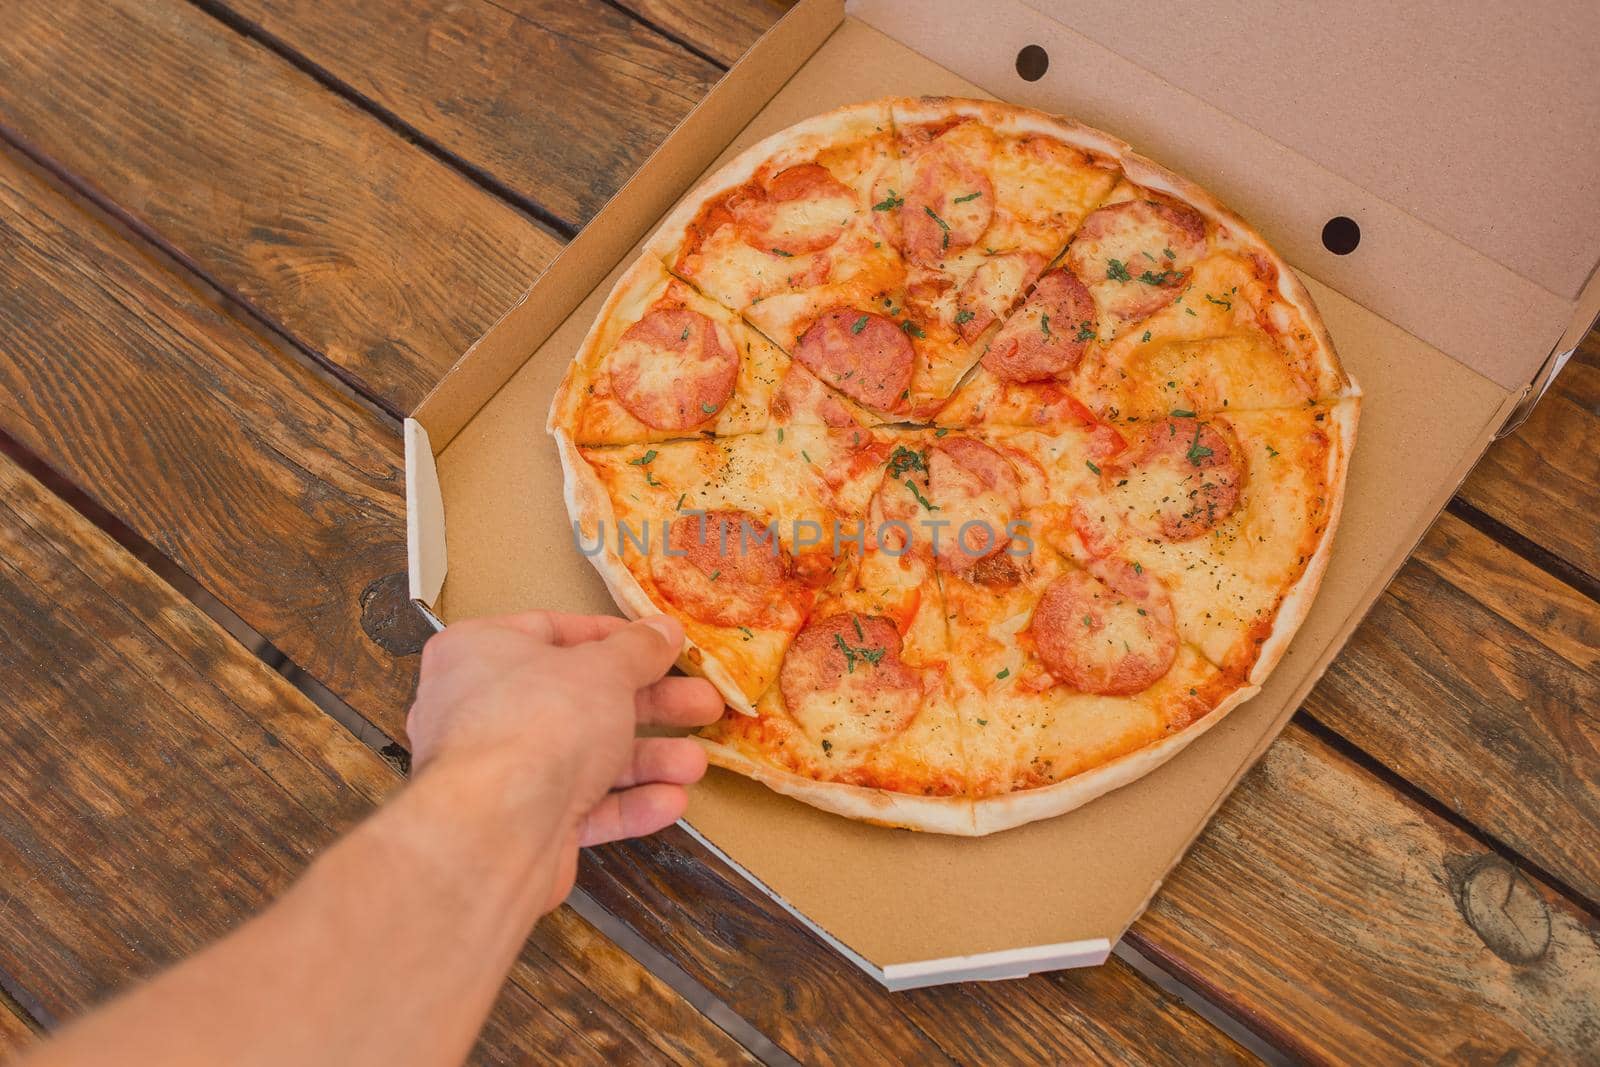 The guy's hand takes a pizza in cardboard box of against the background of a wooden table. Delicious fast food by AYDO8